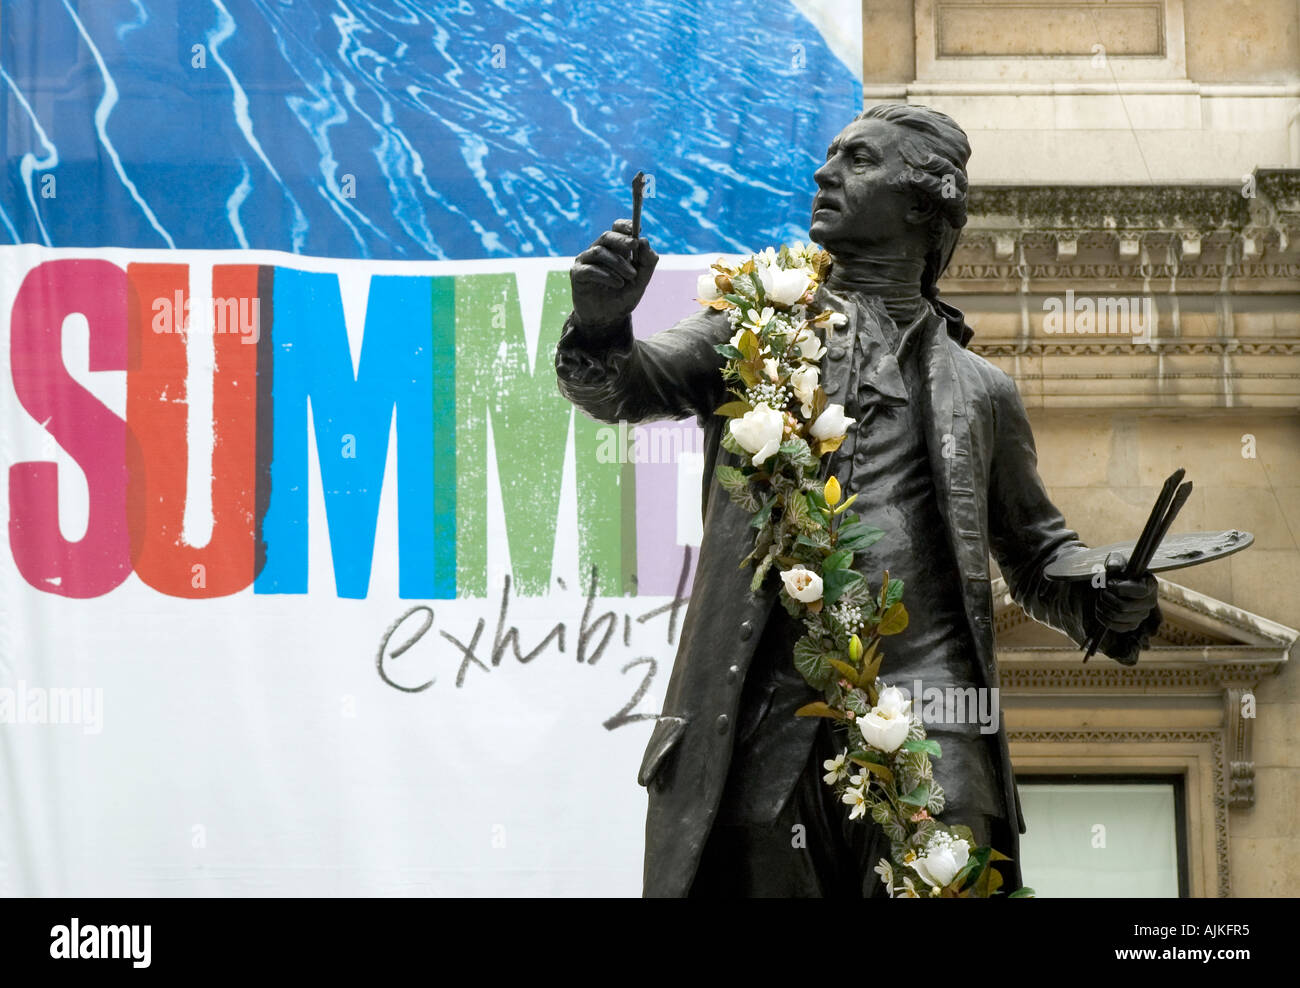 Royal Academy: statue of Sir Joshua Reynolds in front of Summer Exhibition (2005) placard Stock Photo